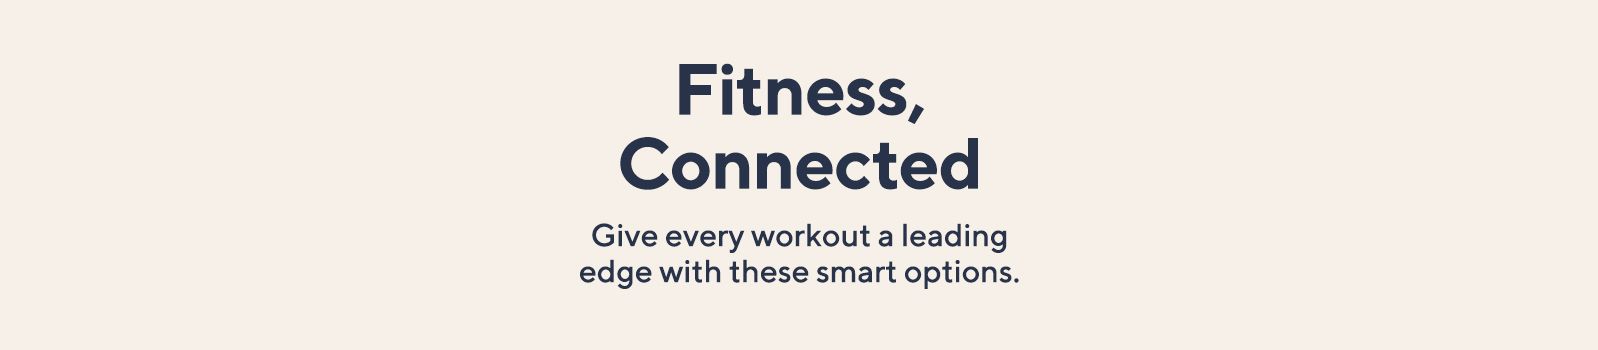 Fitness, Connected.  Give every workout a leading edge with these smart options.